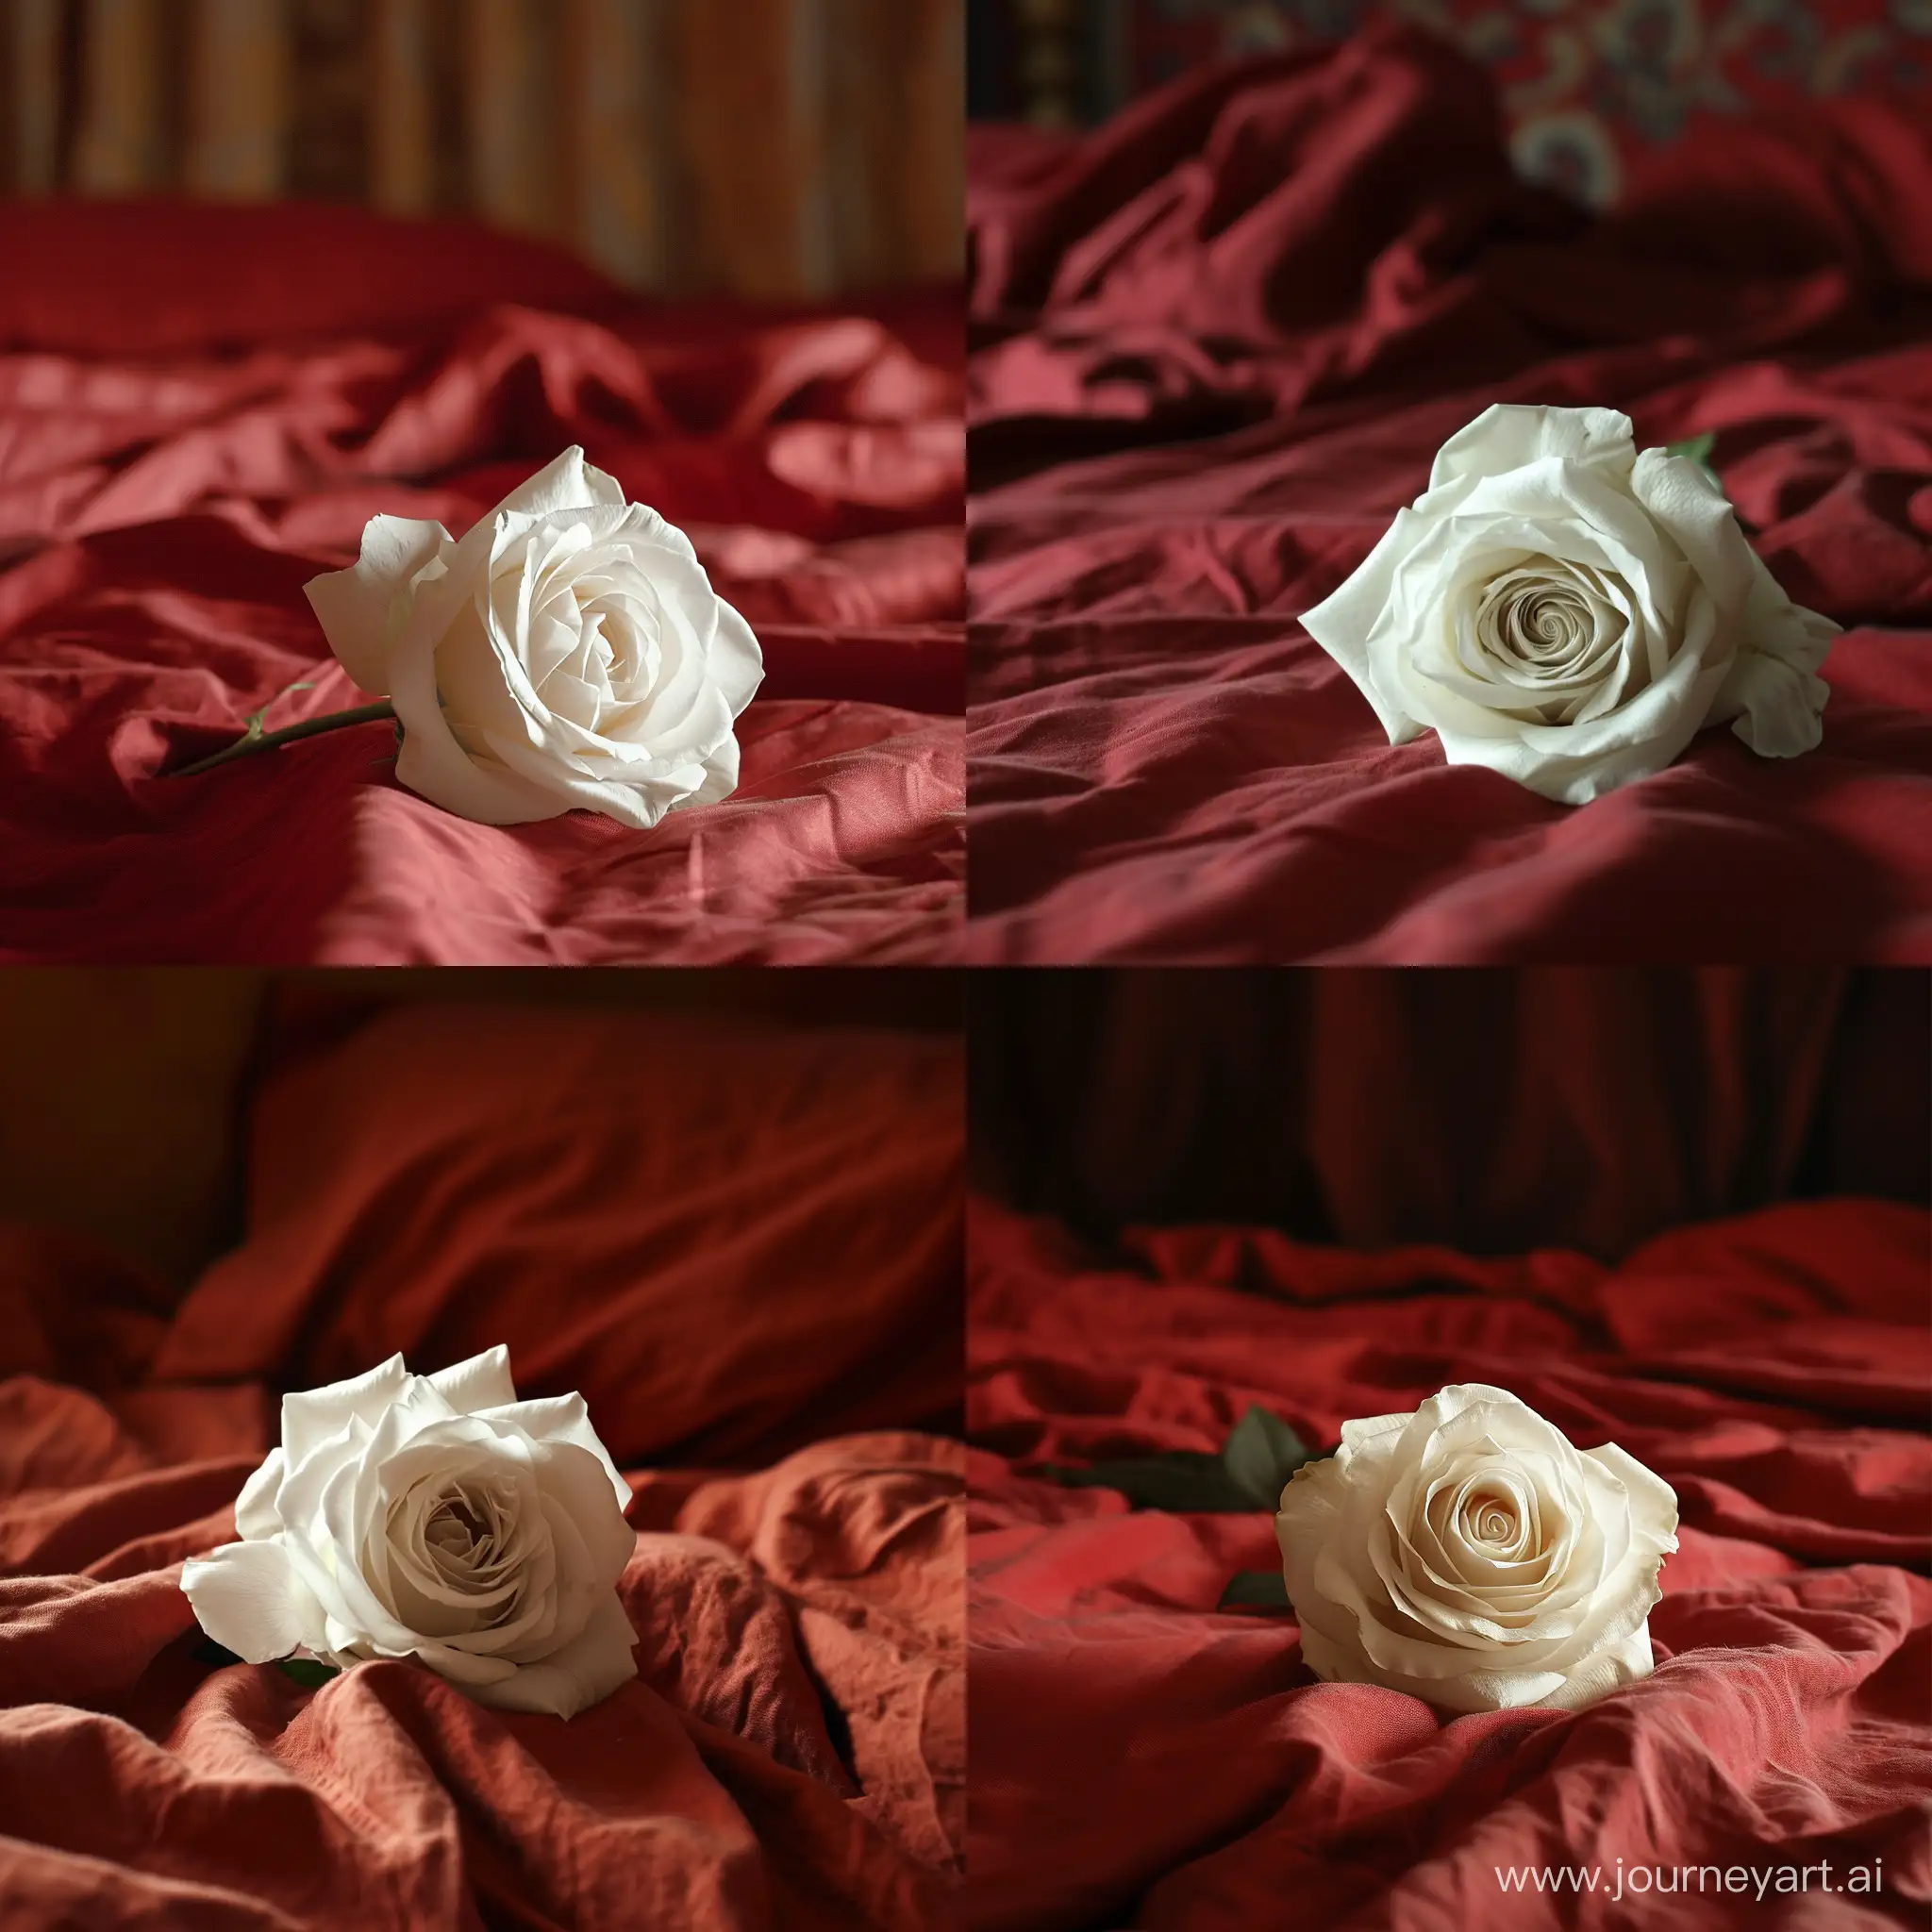 a white rose on the background of a bed made with red linen